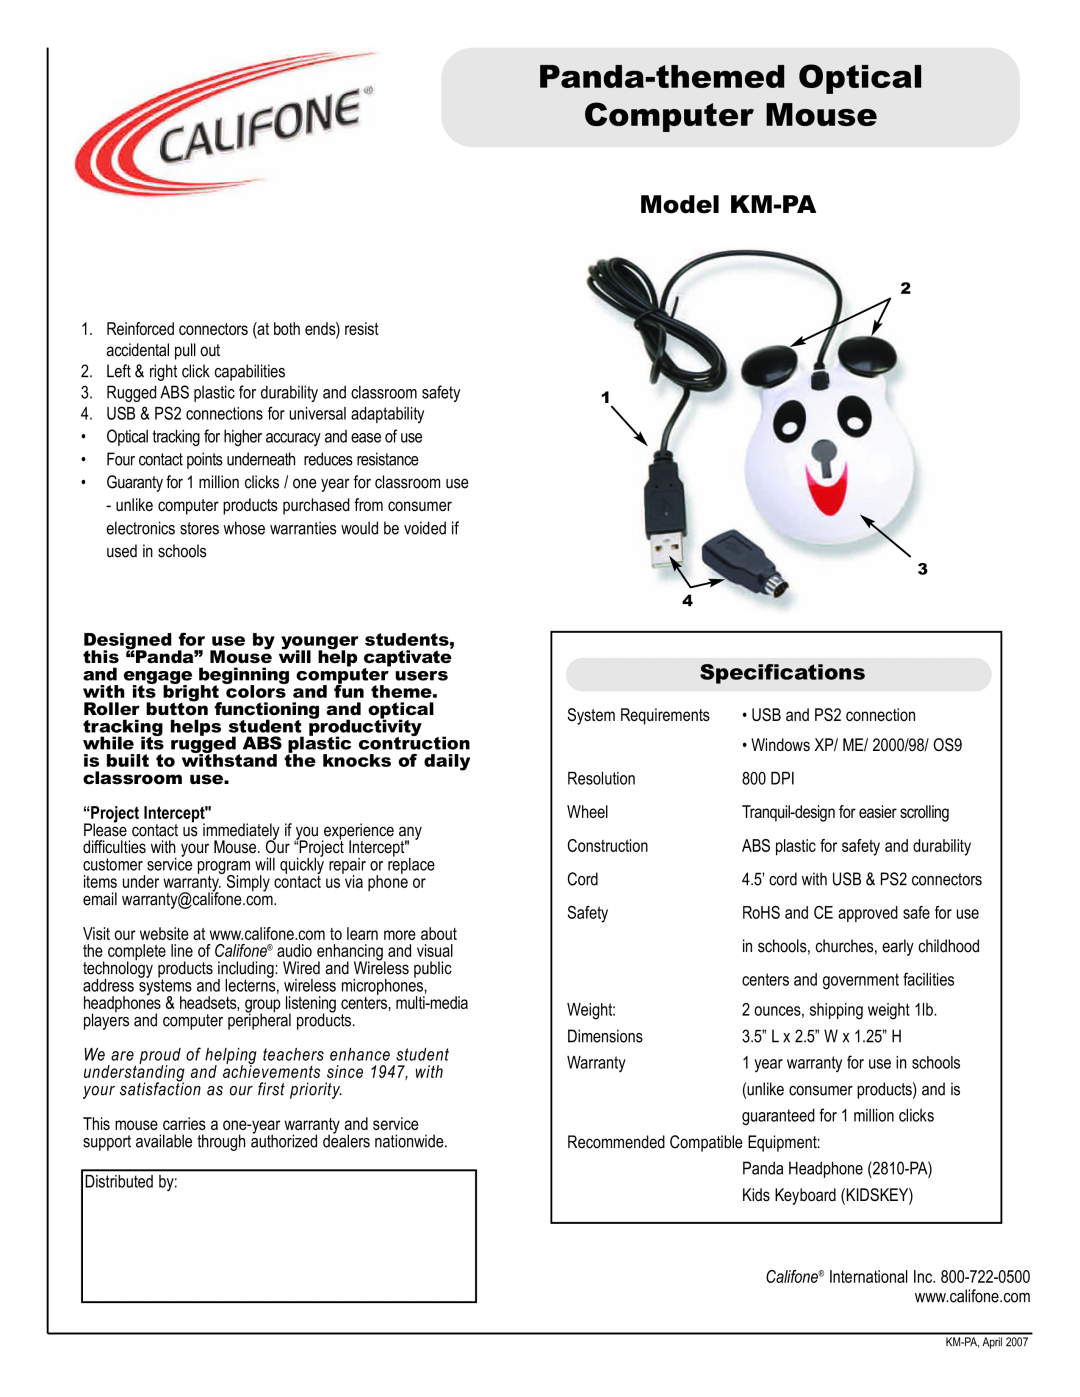 Califone specifications Panda-themed Optical Computer Mouse, Model KM-PA, Specifications 